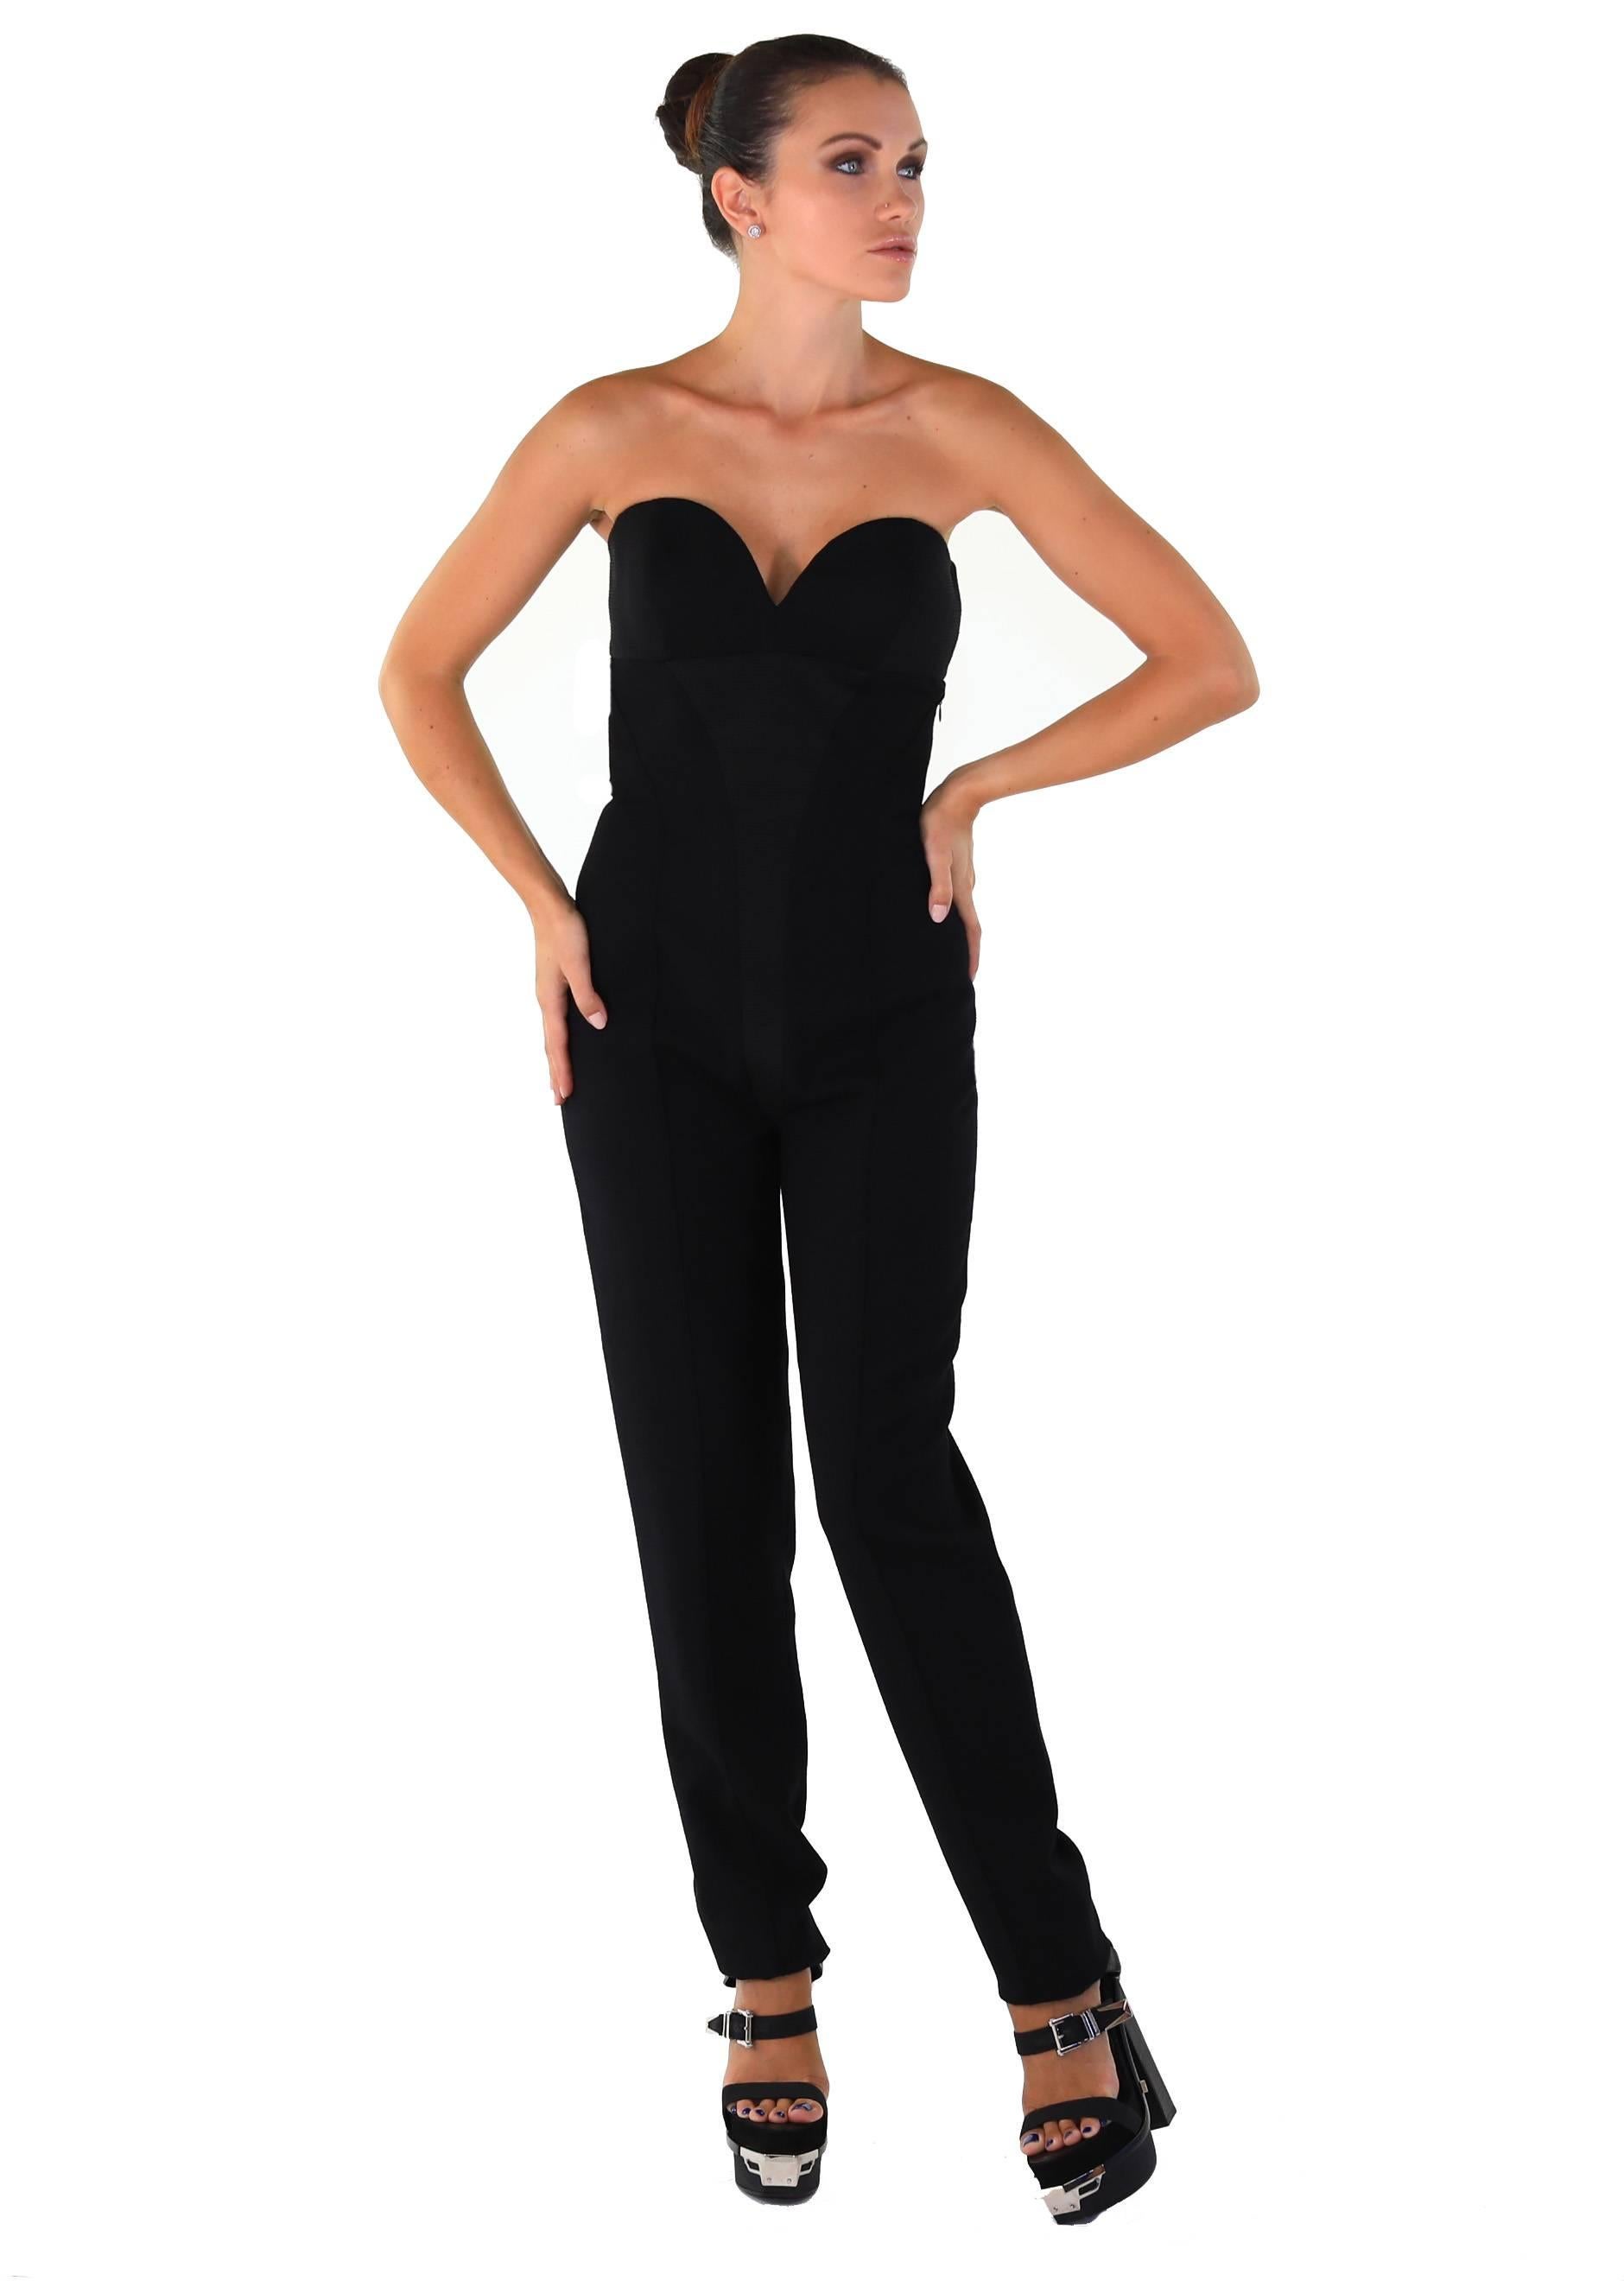 90-s Vintage Gianni Versace Couture Black Jumpsuit

Strapless

Inner corset

Embroidered details

67% wool, 33% silk
Bust: up to 31